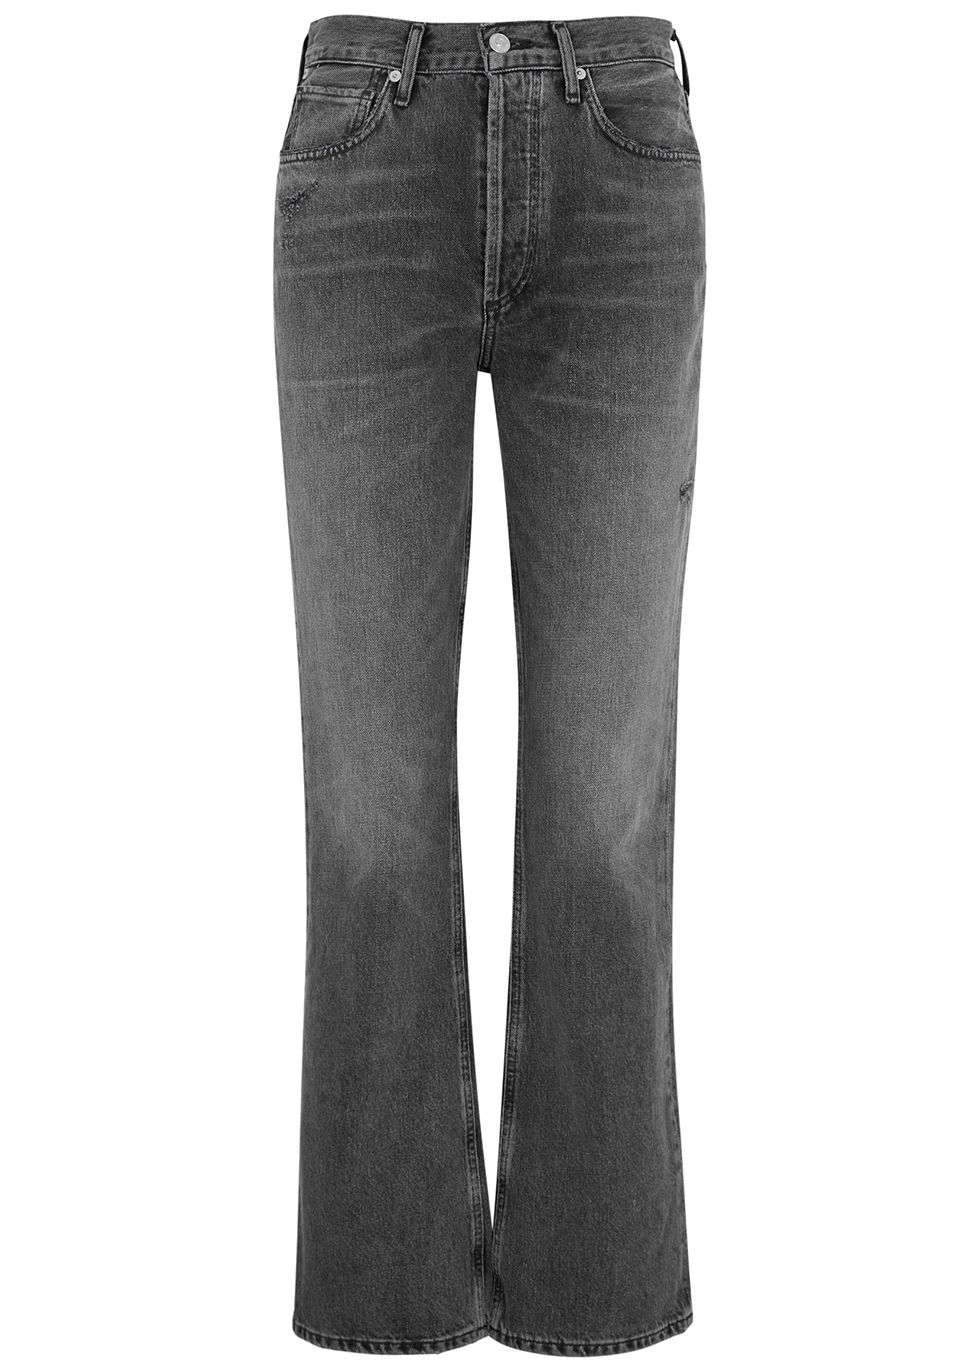 Citizens of Humanity Libby grey bootcut jeans - Harvey Nichols